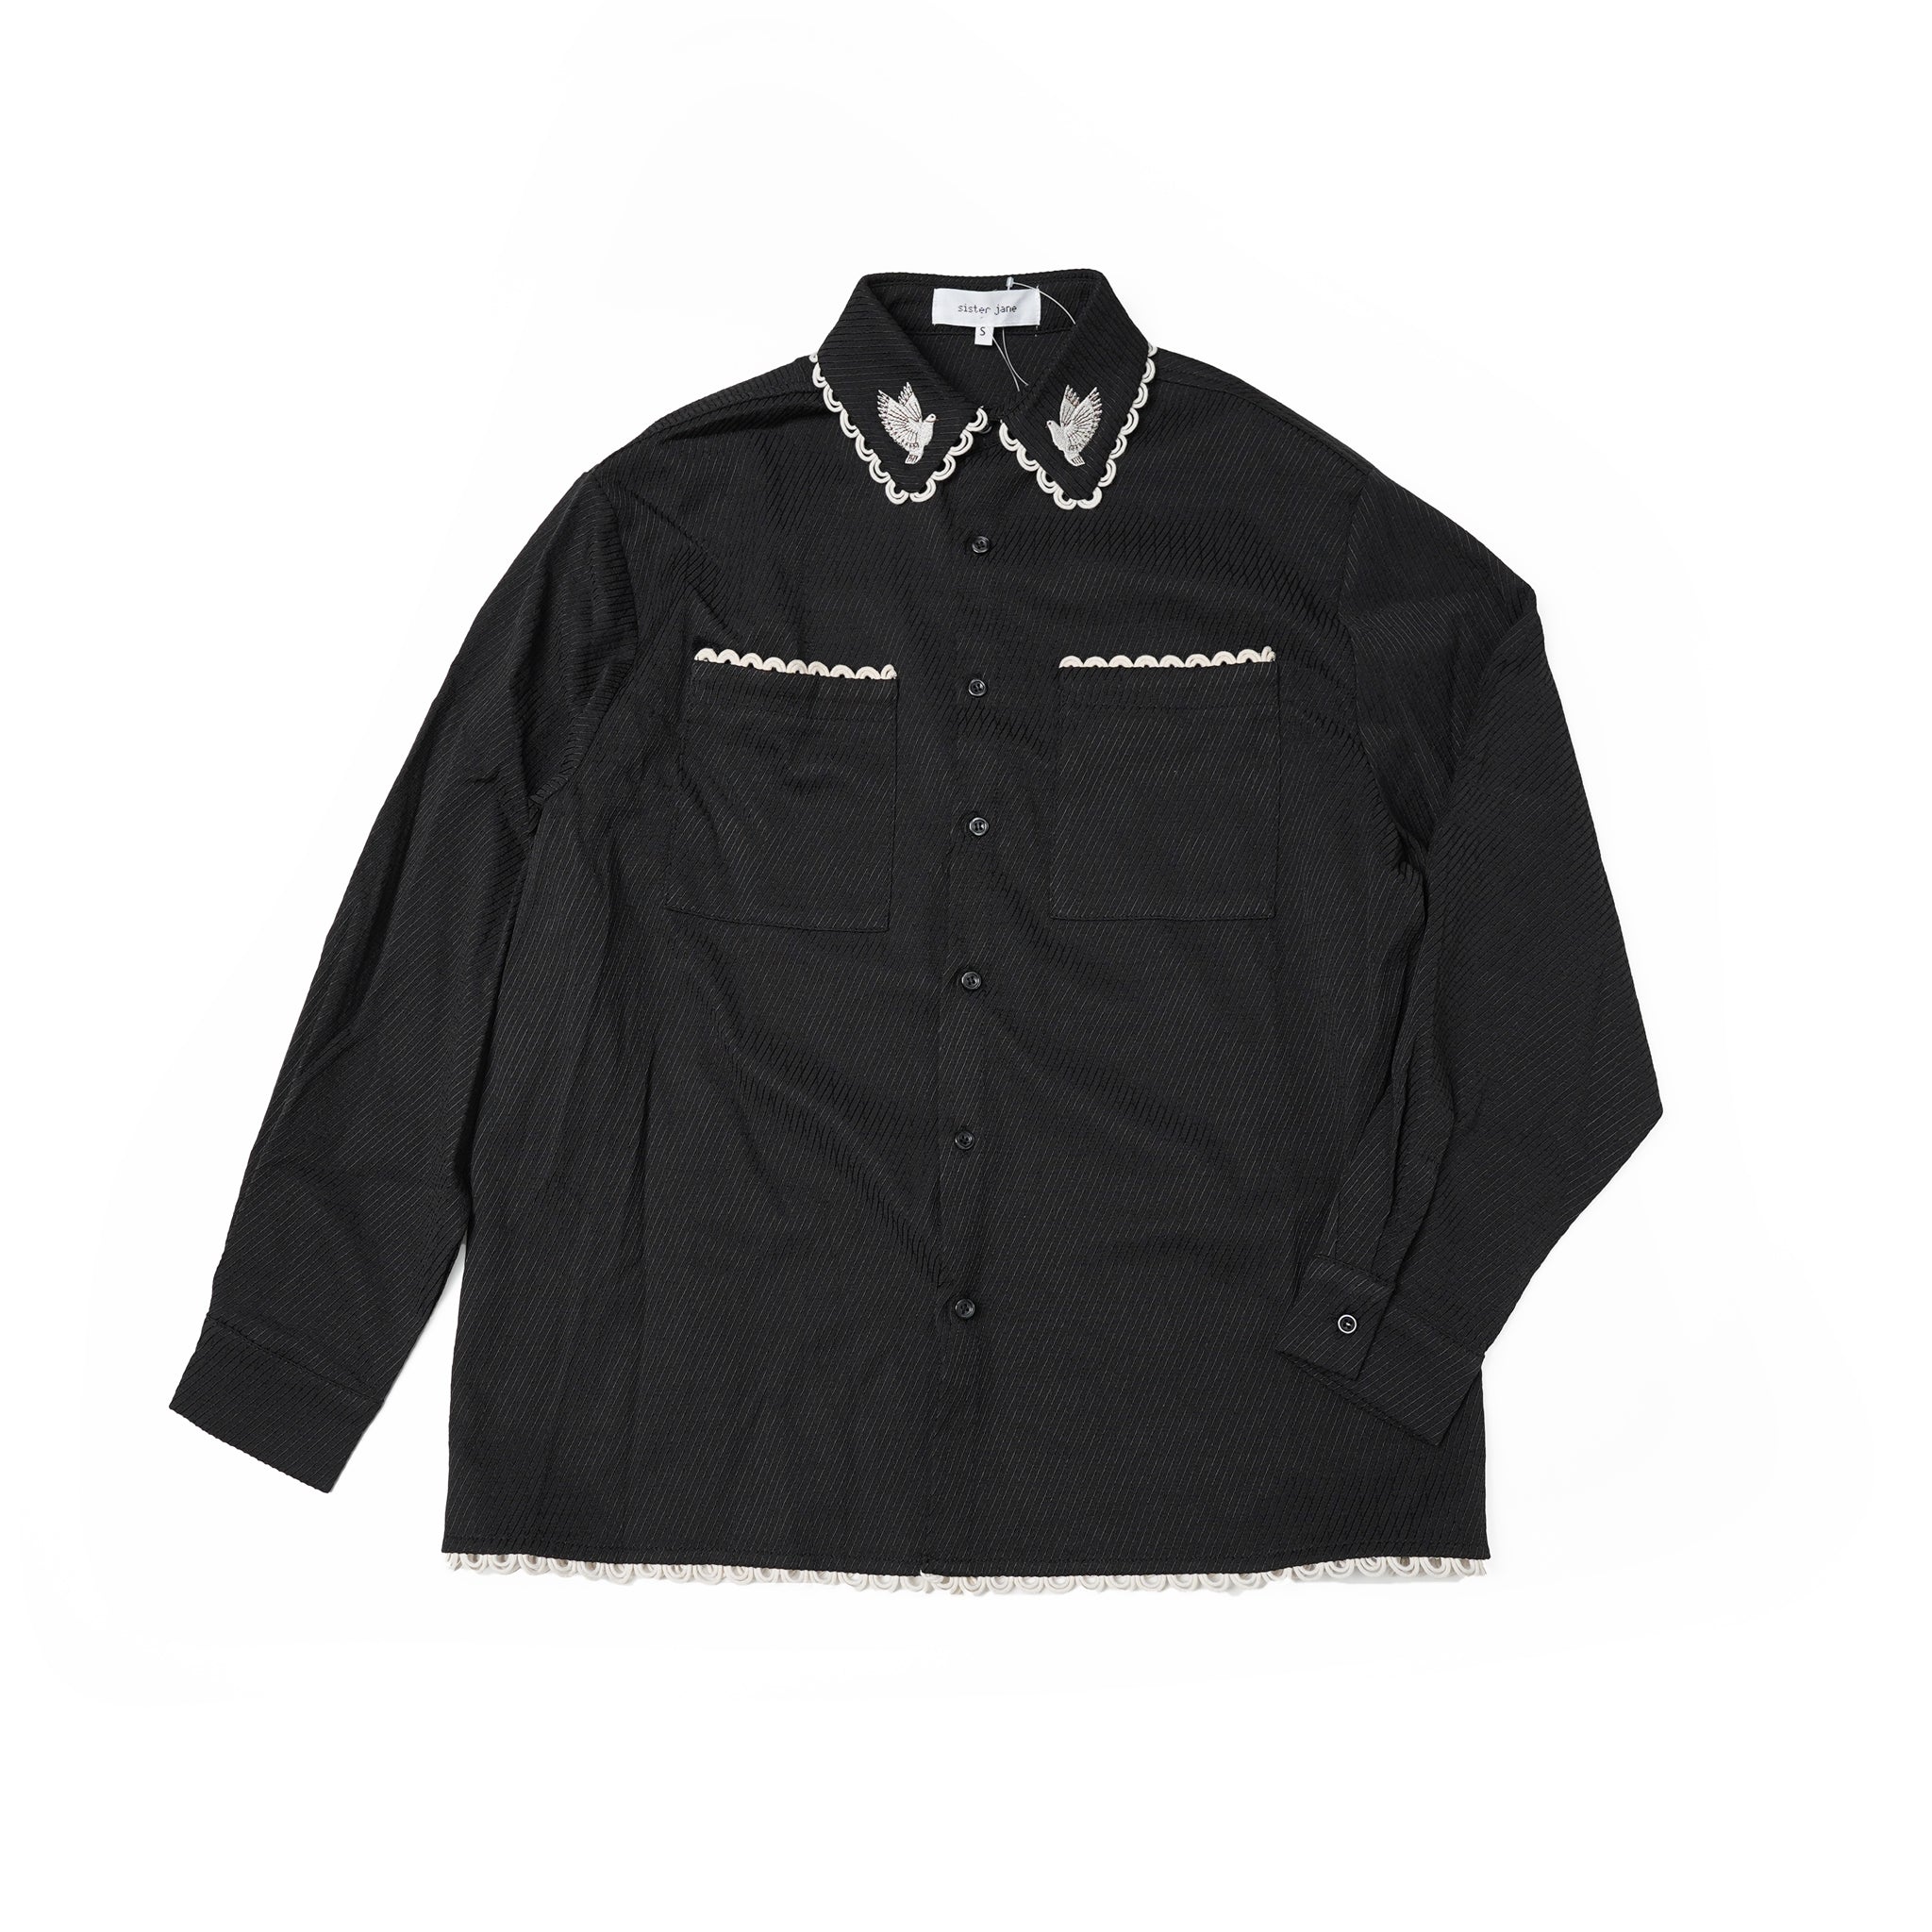 No:28SM02BLM052BLK | Name:Hector Dove Embroidered Shirt | Color:Black【SISTER JANE_シスタージェーン】